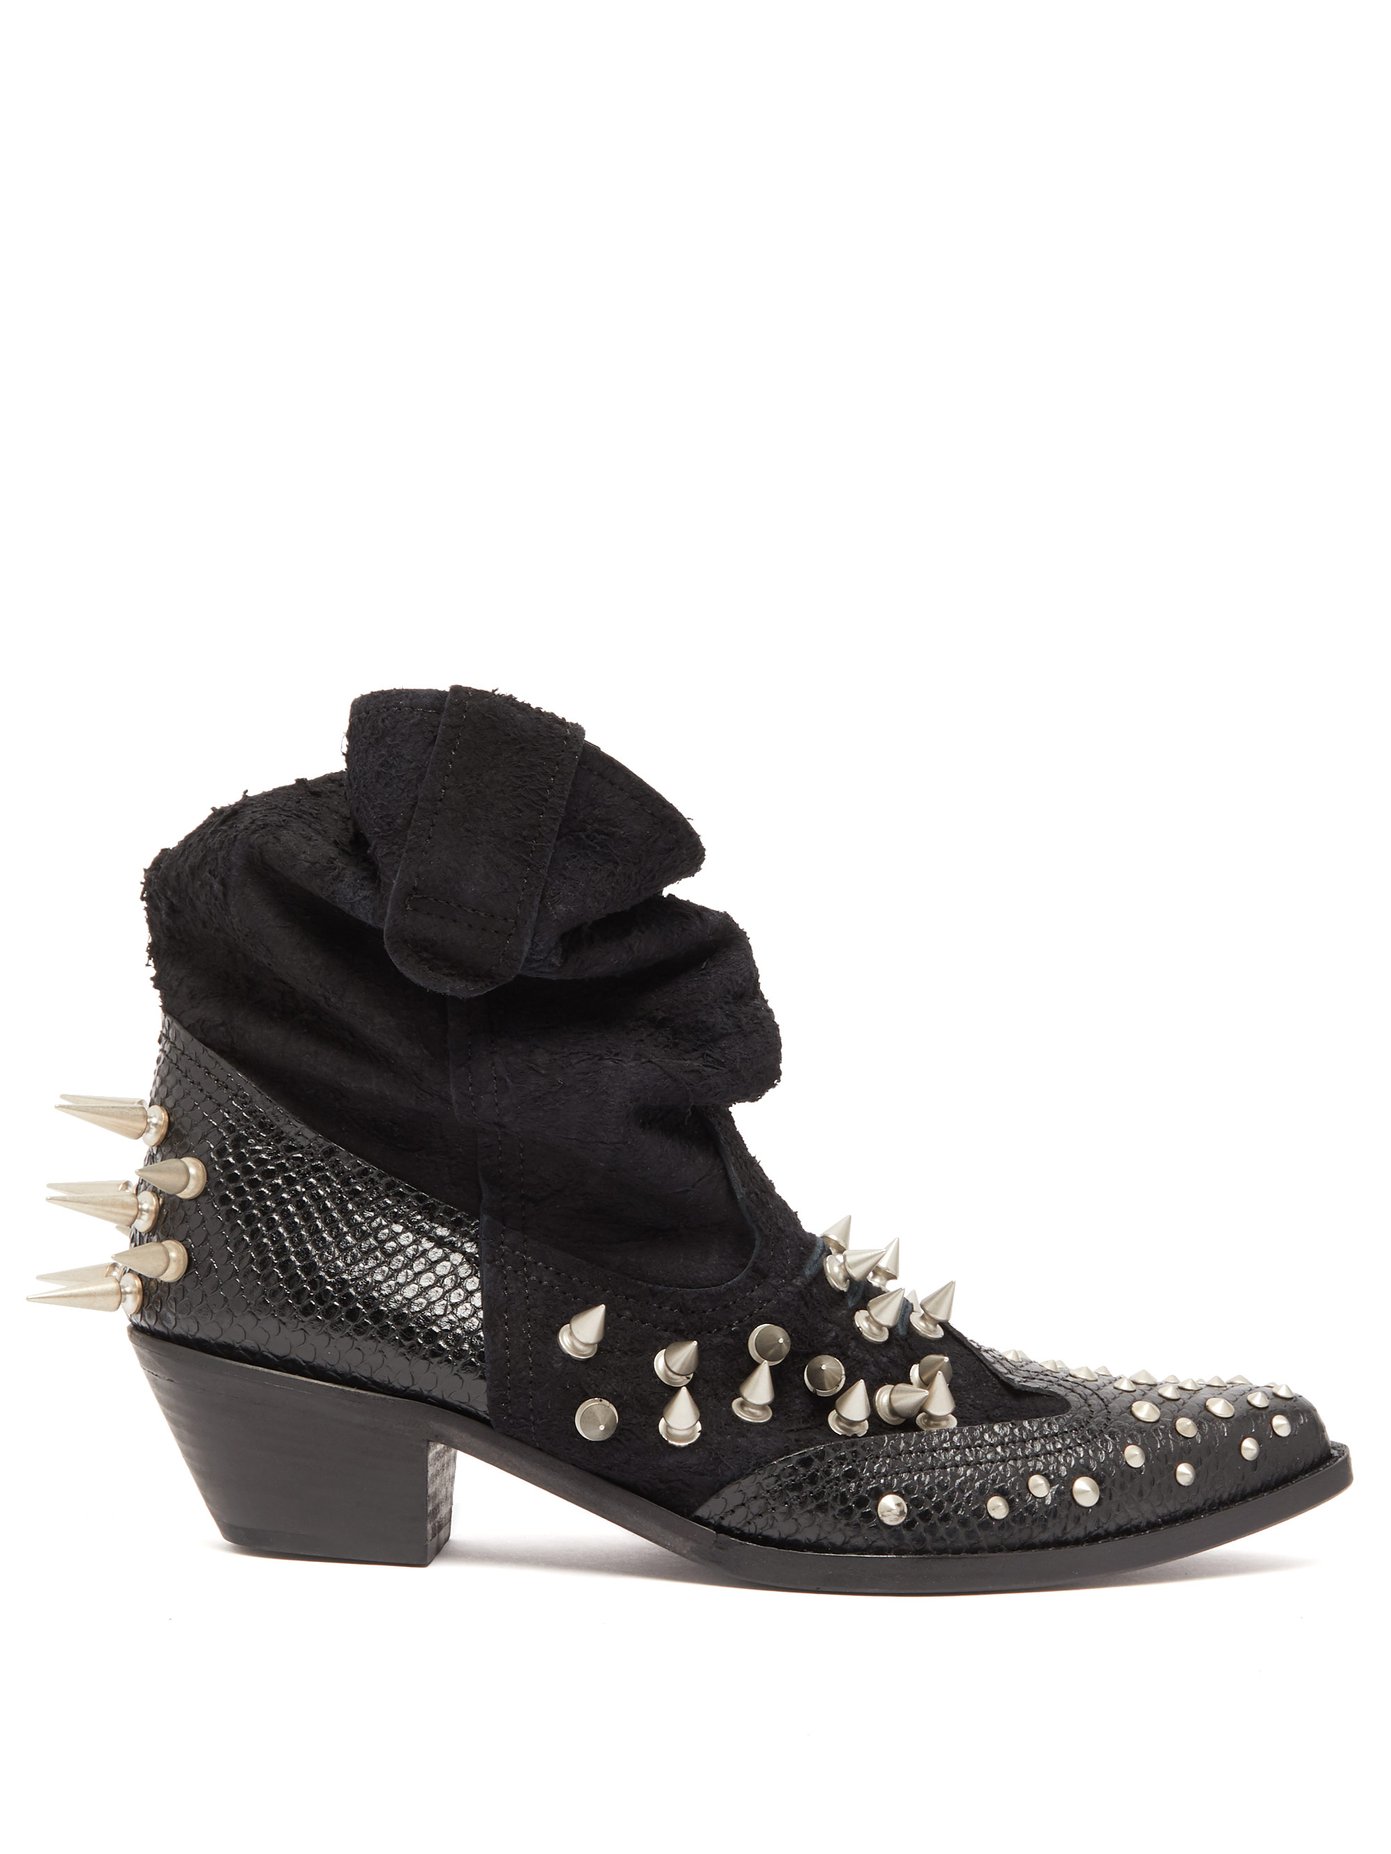 Spiked suede and snake-effect leather 